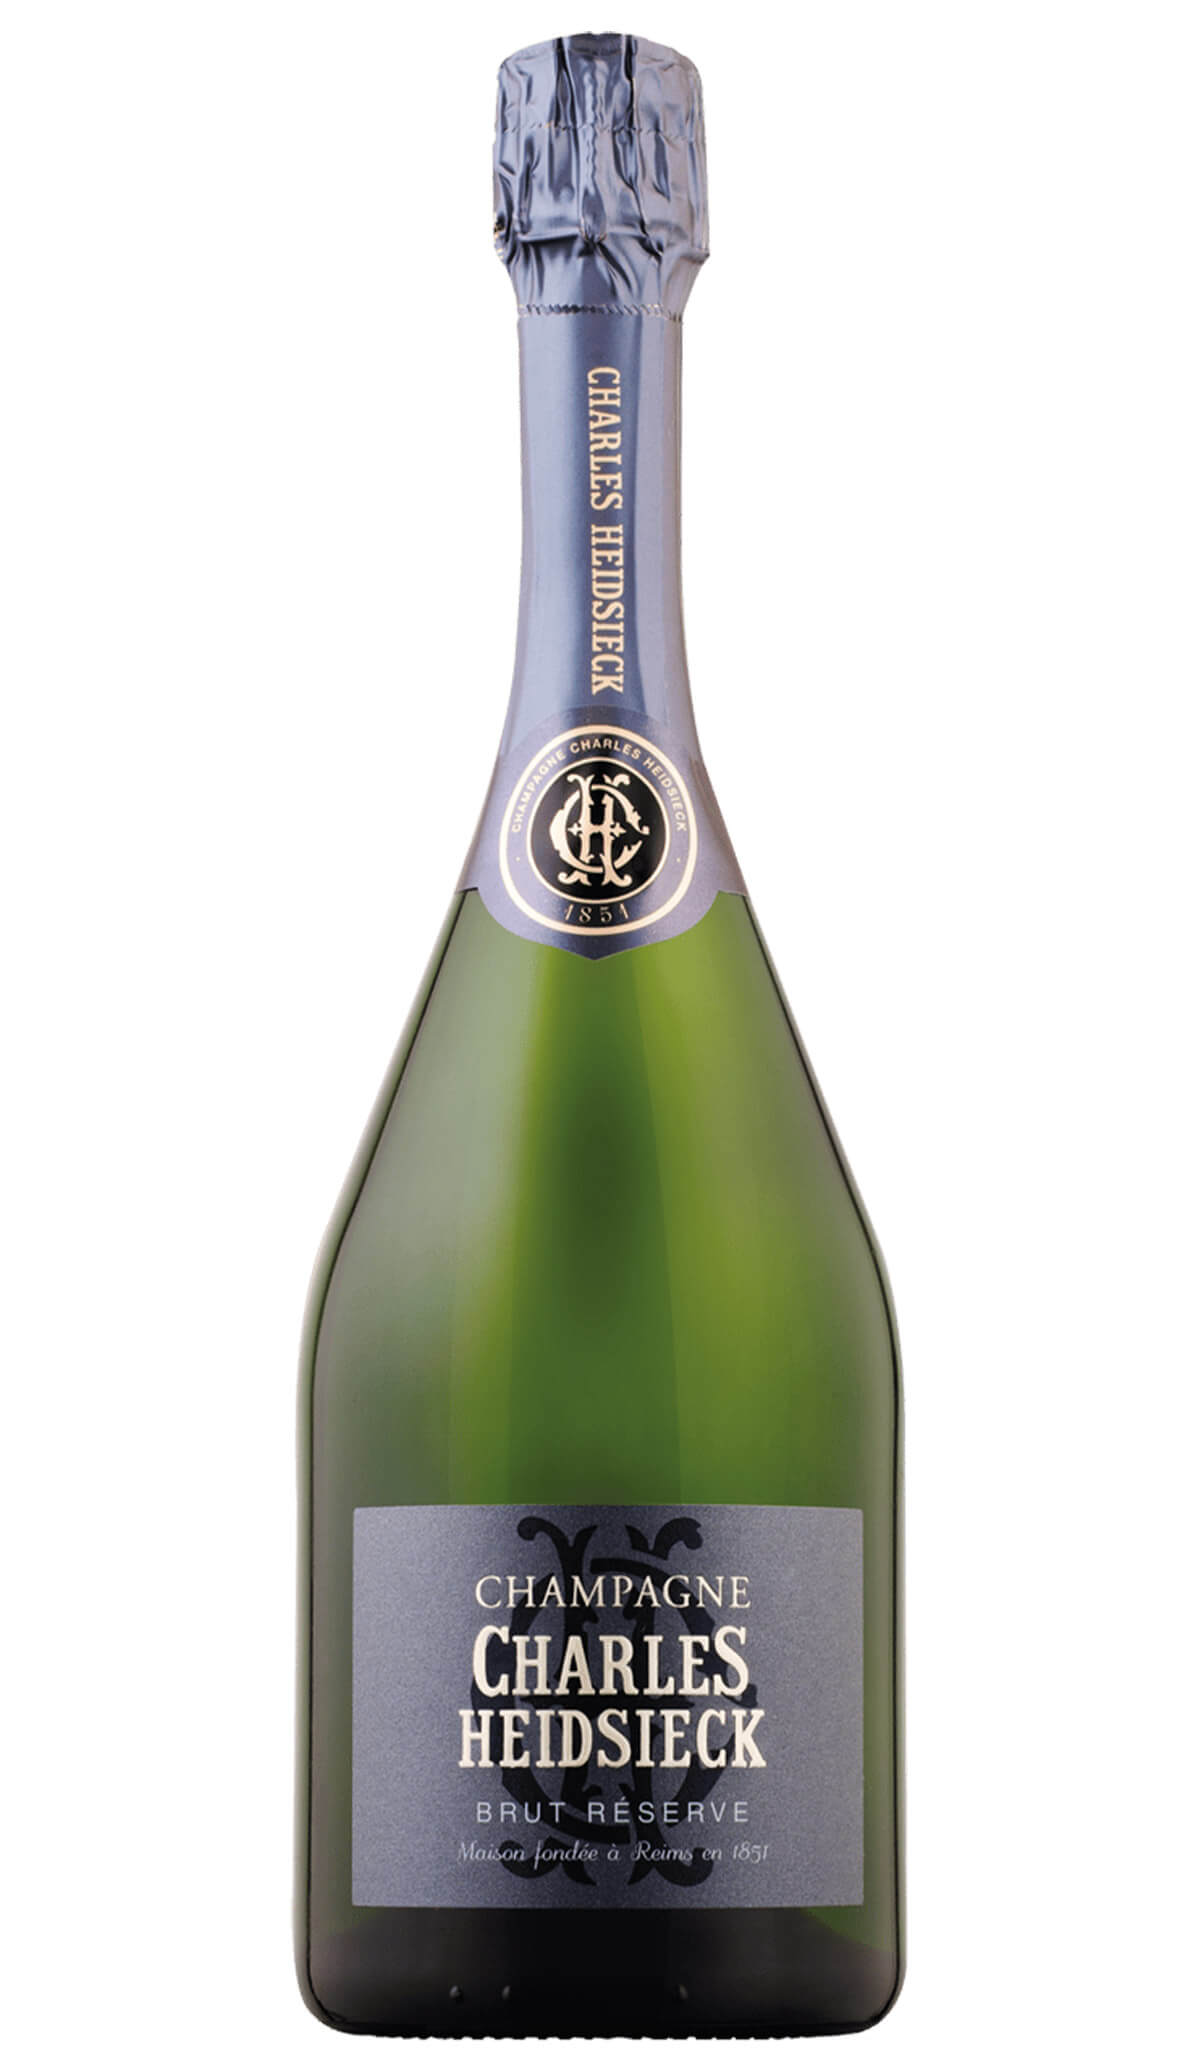 Find out more, explore the range and purchase Charles Heidsieck Brut Reserve NV 750mL available online at Wine Sellers Direct - Australia's independent liquor specialists.